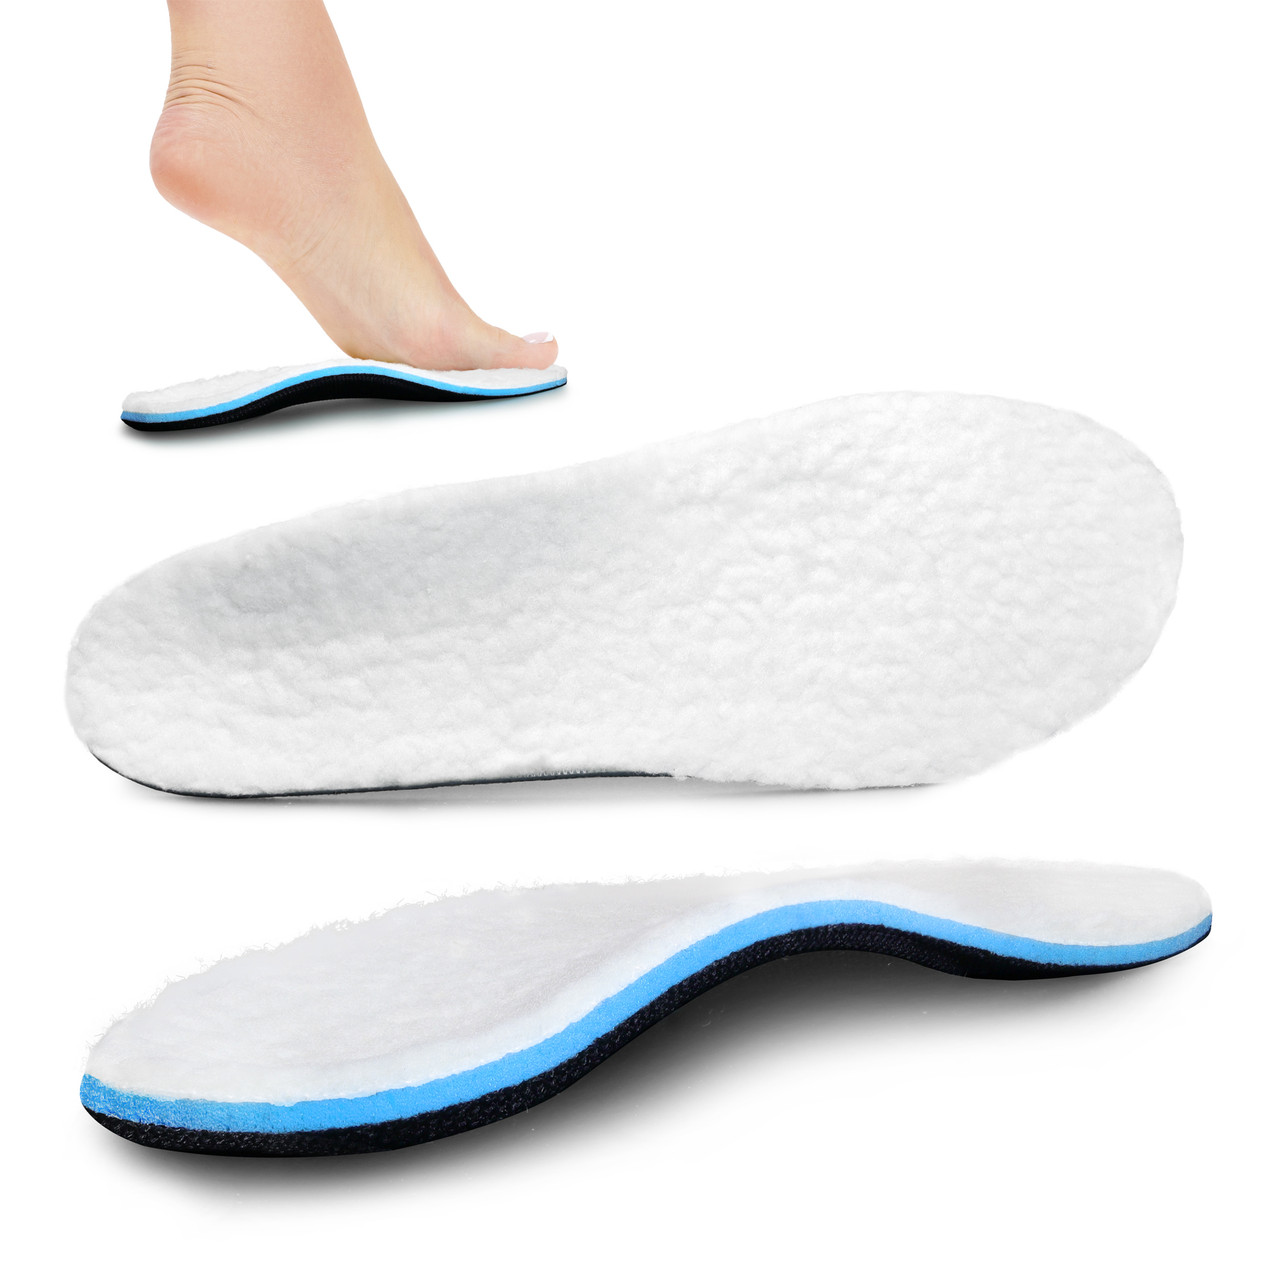 Arch Support Inserts, Braces, Pads, and Cushions